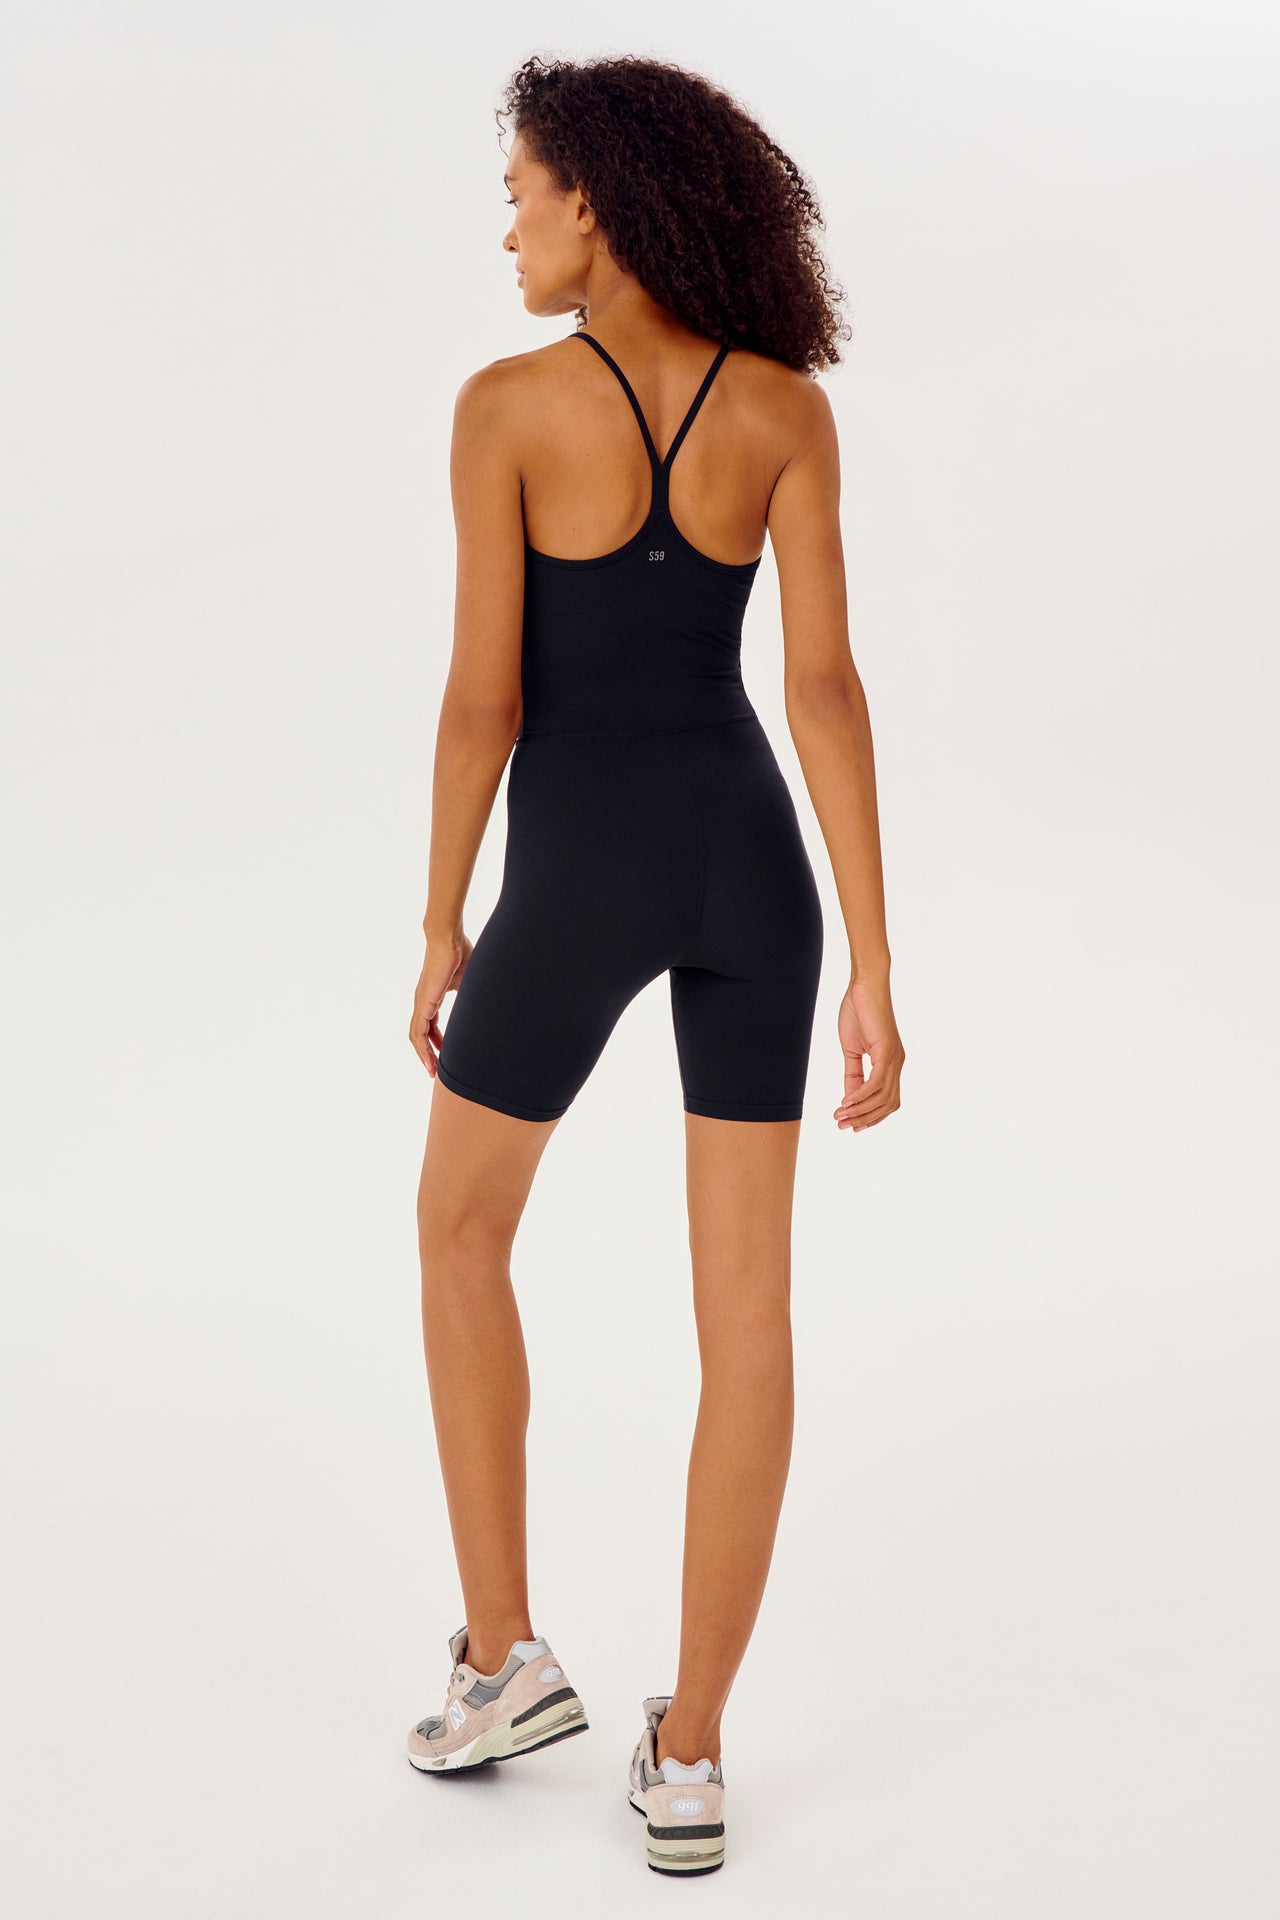 Full back view of black mid thigh spaghetti strap body suit/one piece